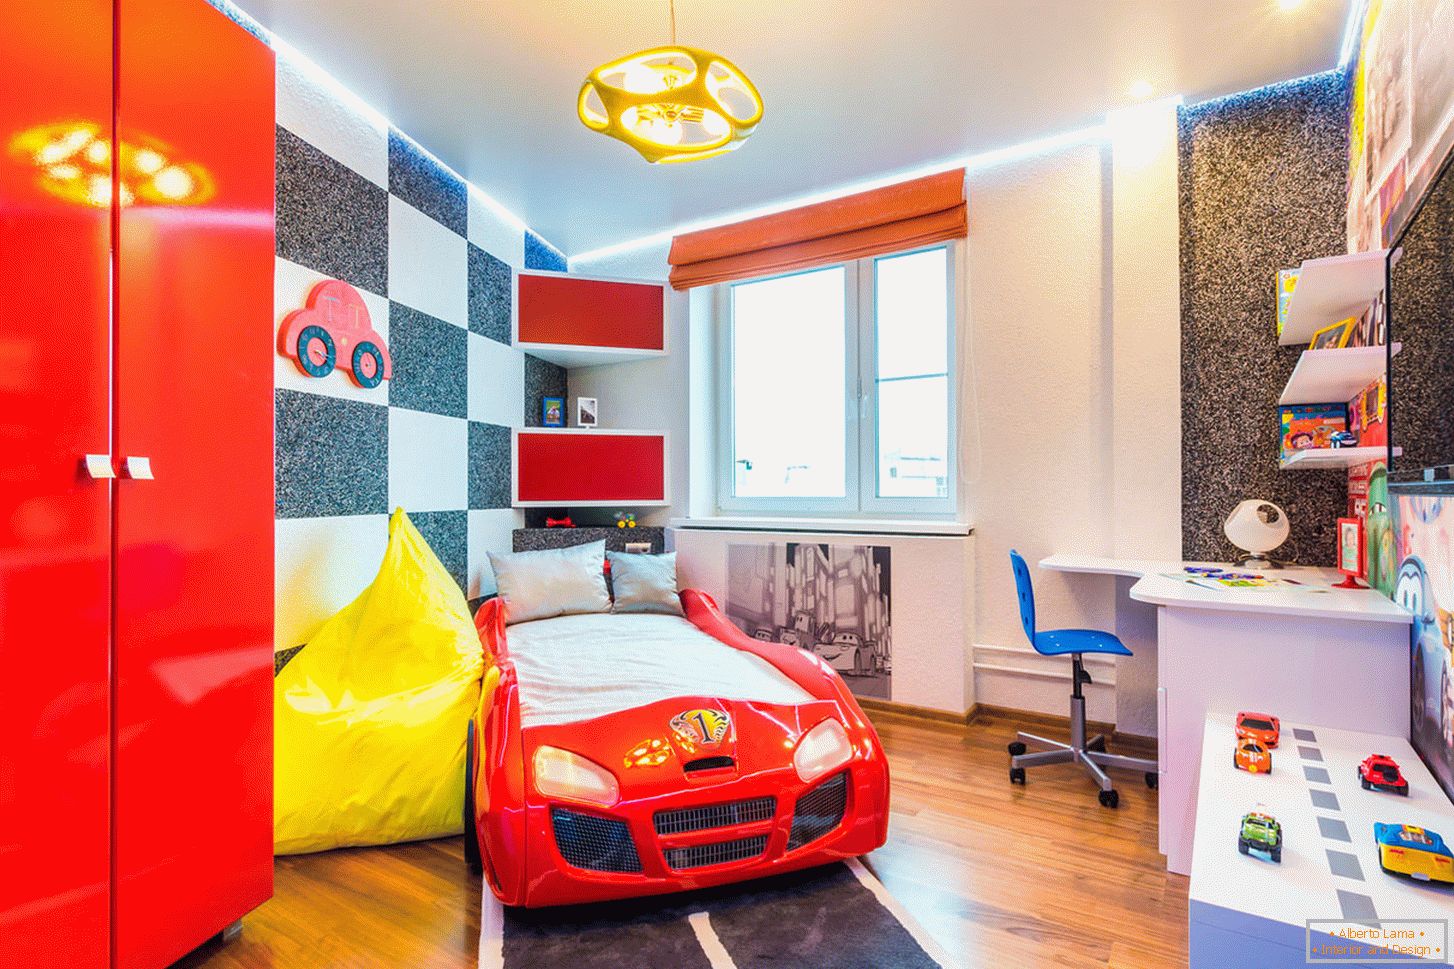 The design of the children's room in the style of the car